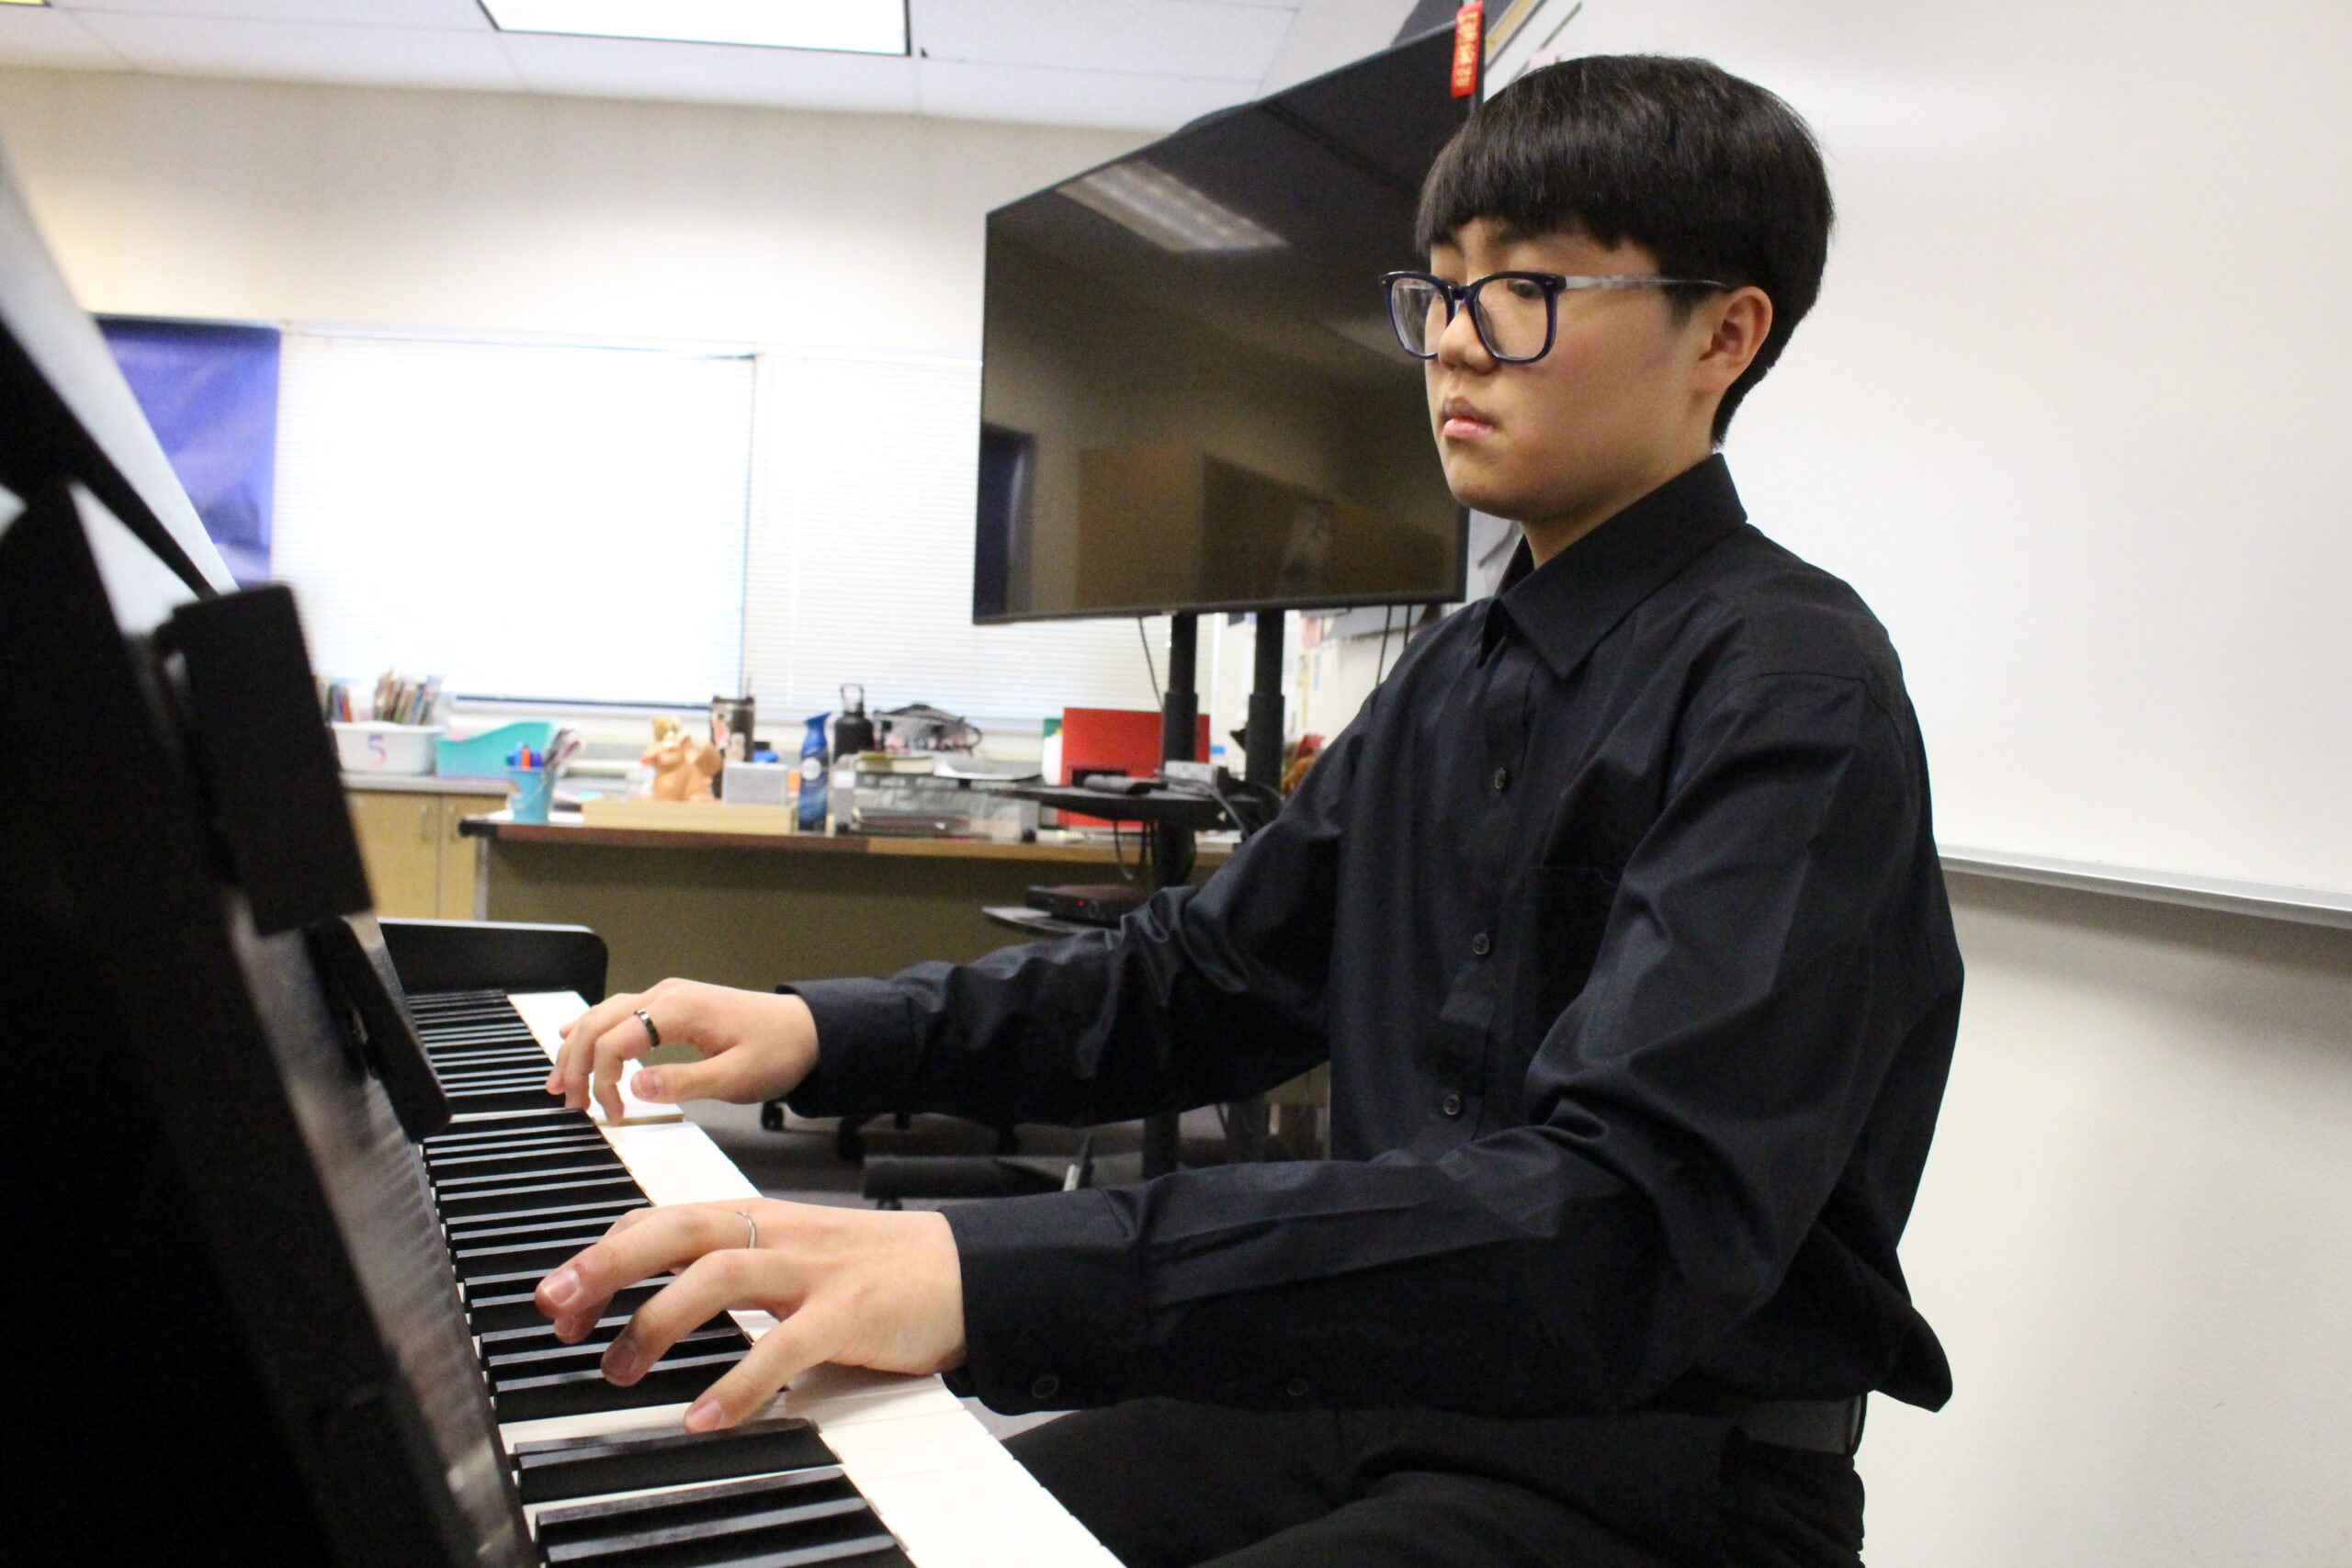 A middle school musician plays piano